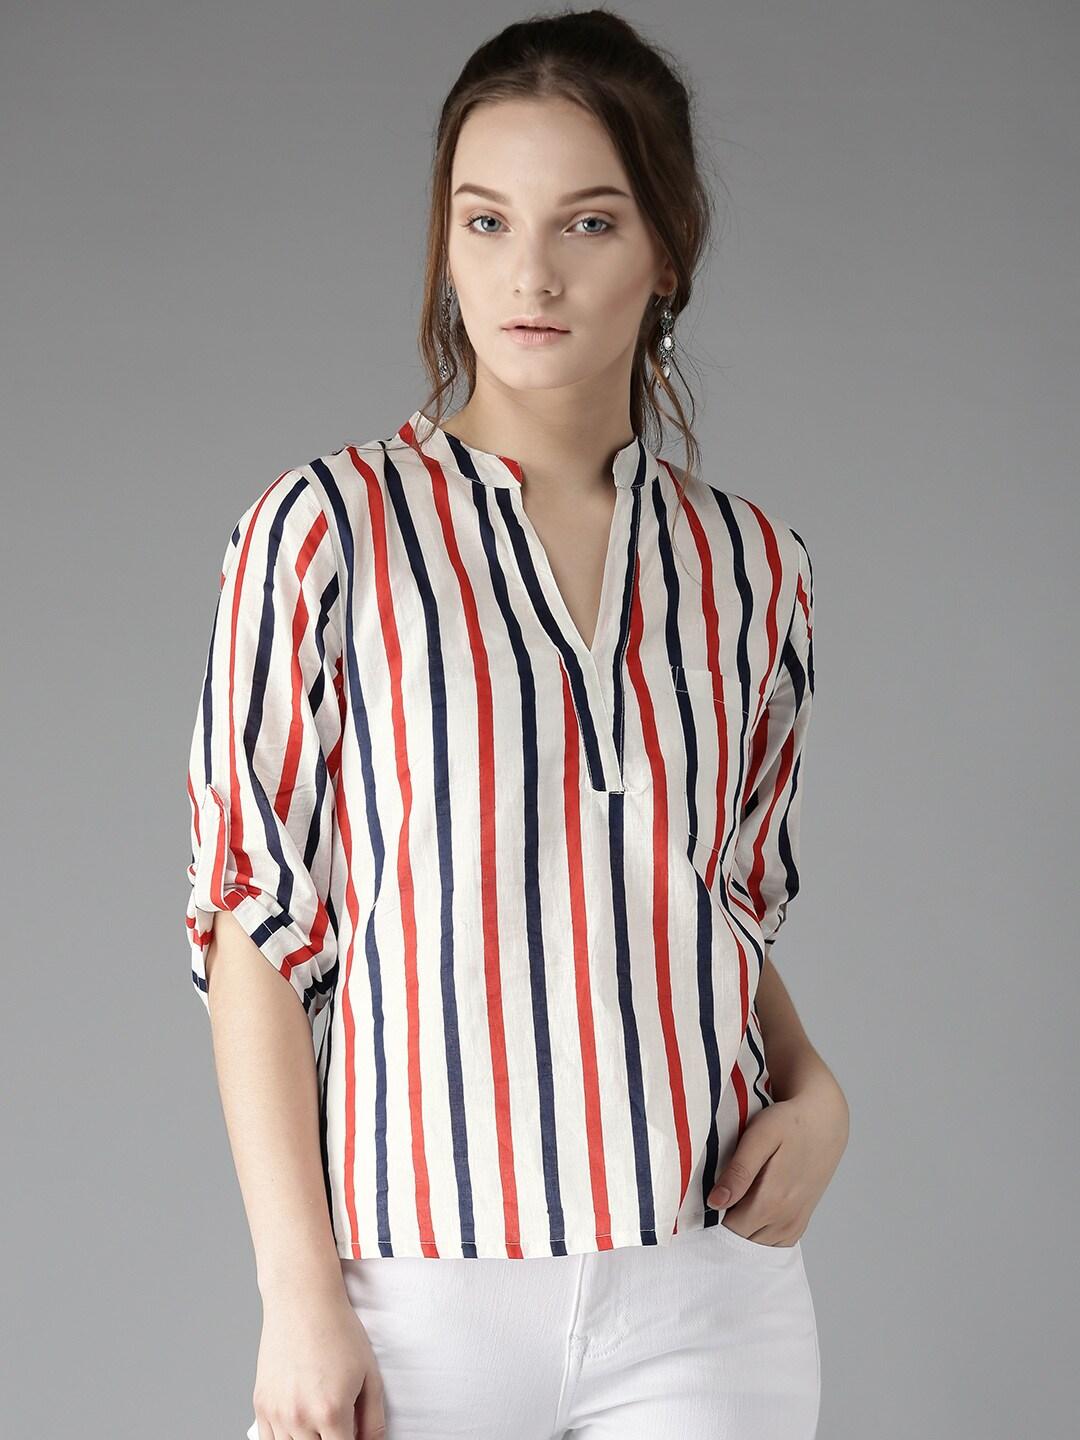 here&now women white & navy lightweight striped shirt style pure cotton top